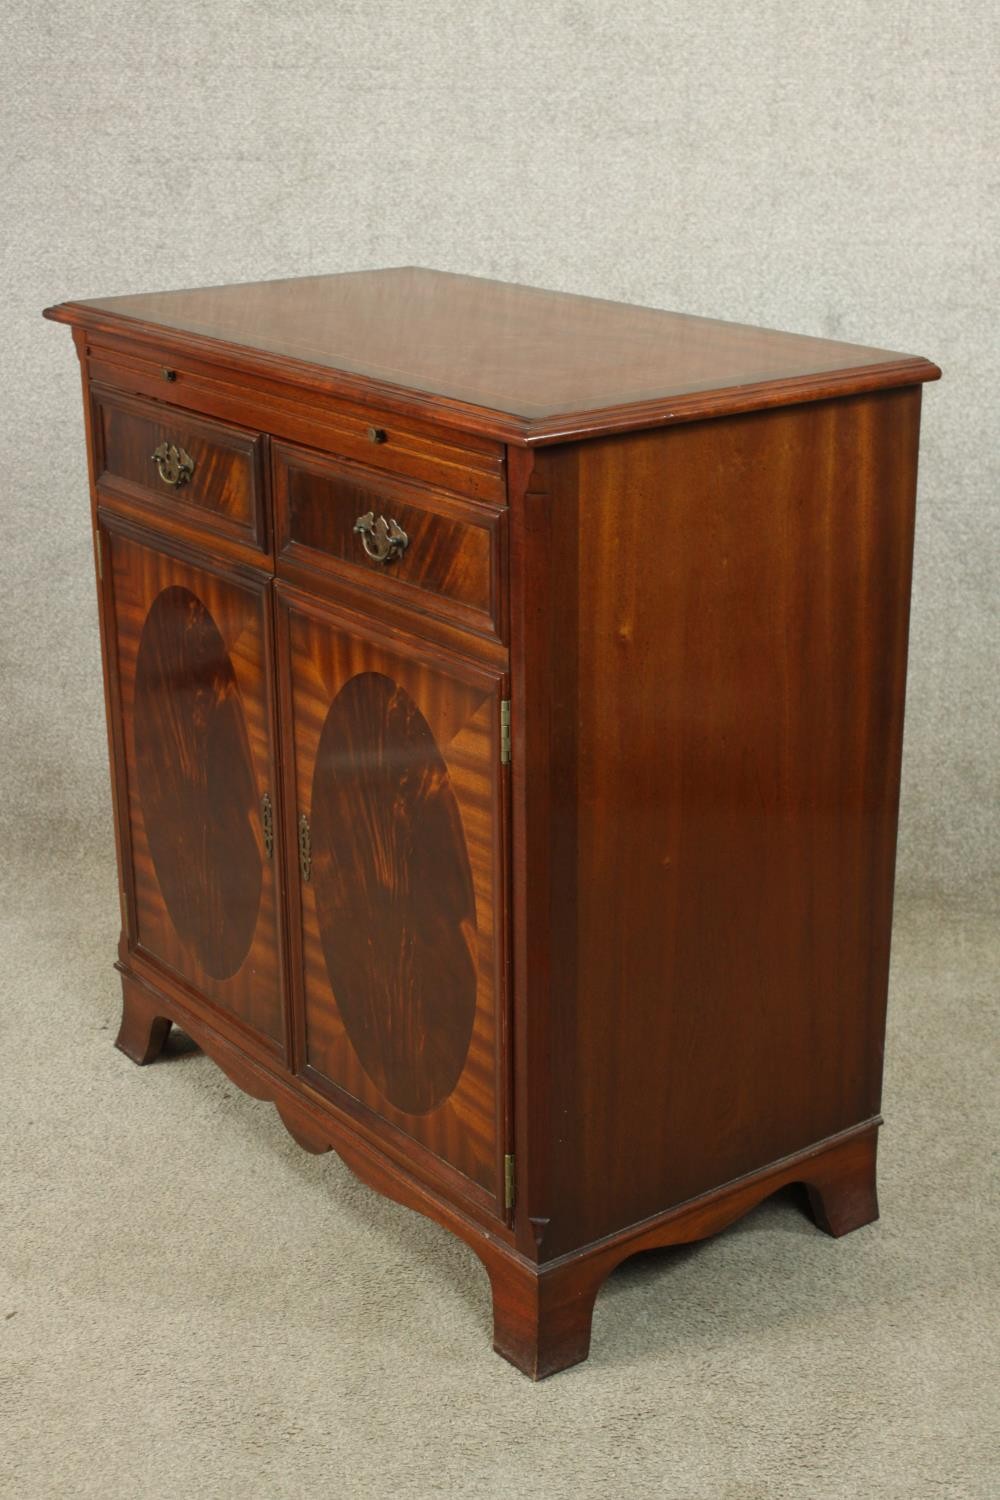 A contemporary Regency style twin door entertainment cabinet complete with with turntable, amp, - Image 4 of 6